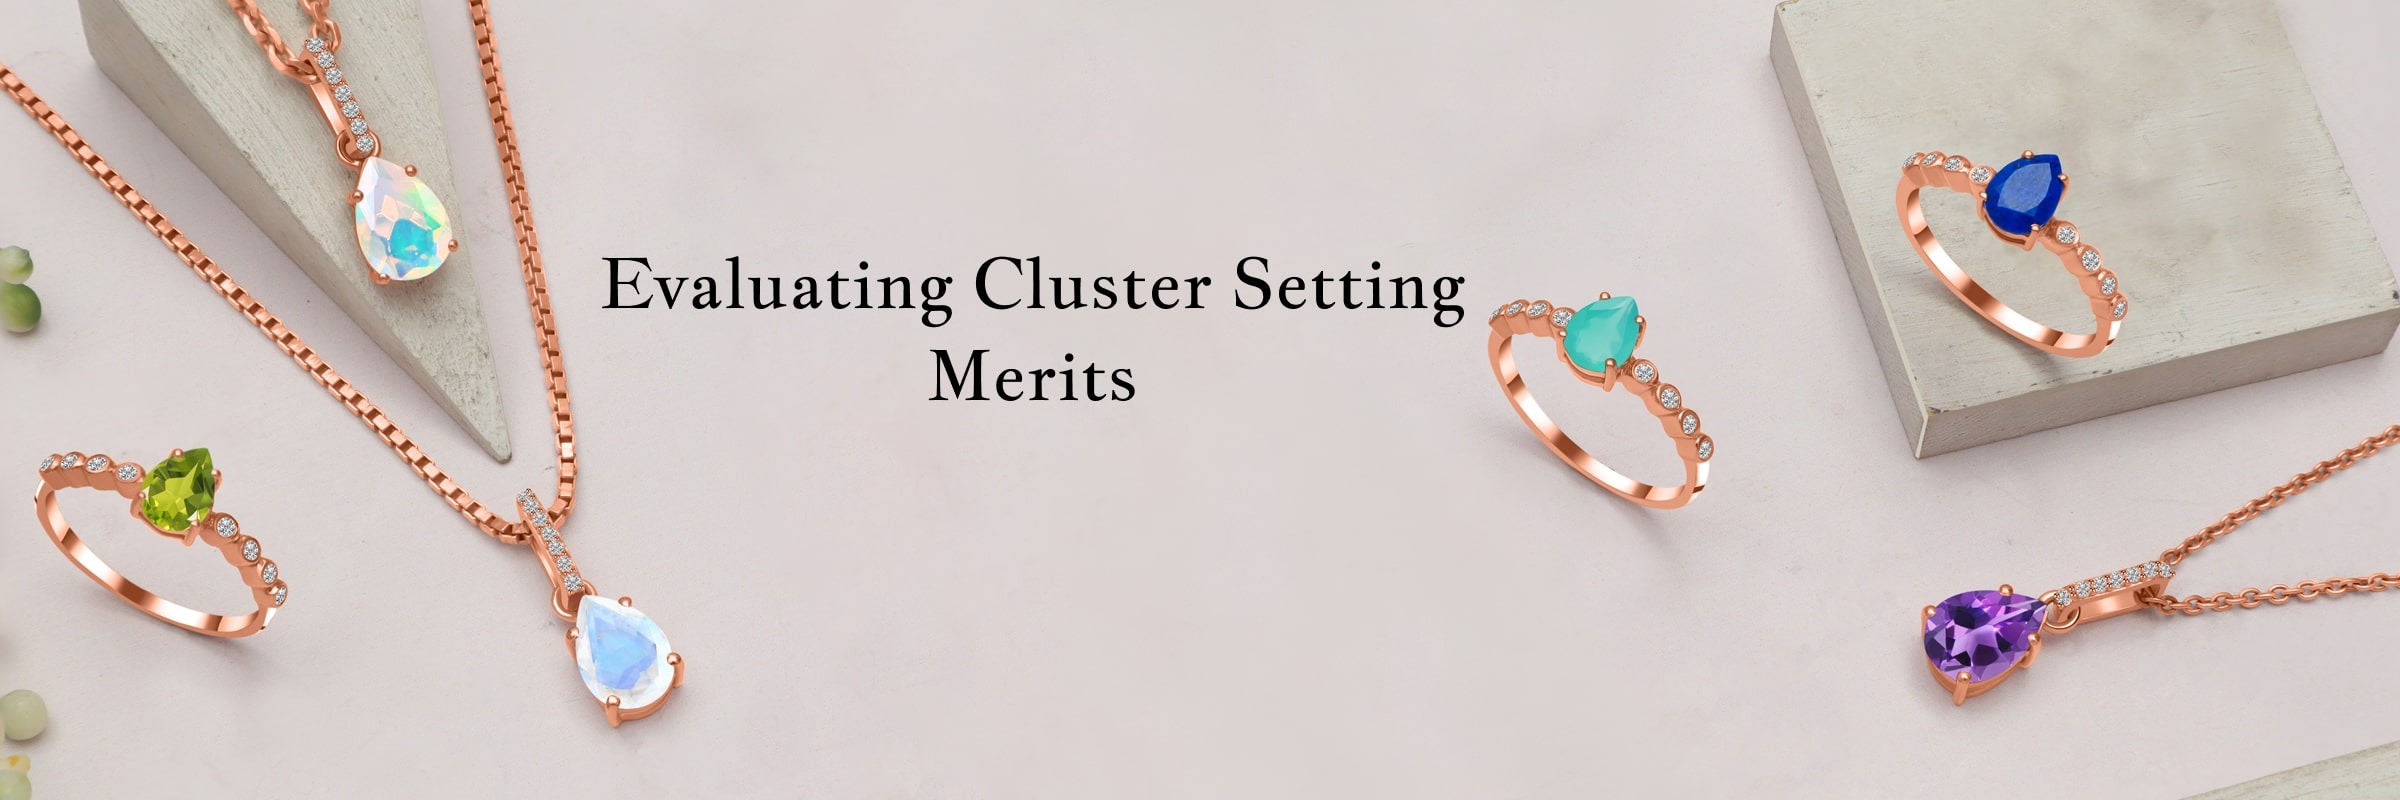 Pros And Cons Of A Cluster Setting